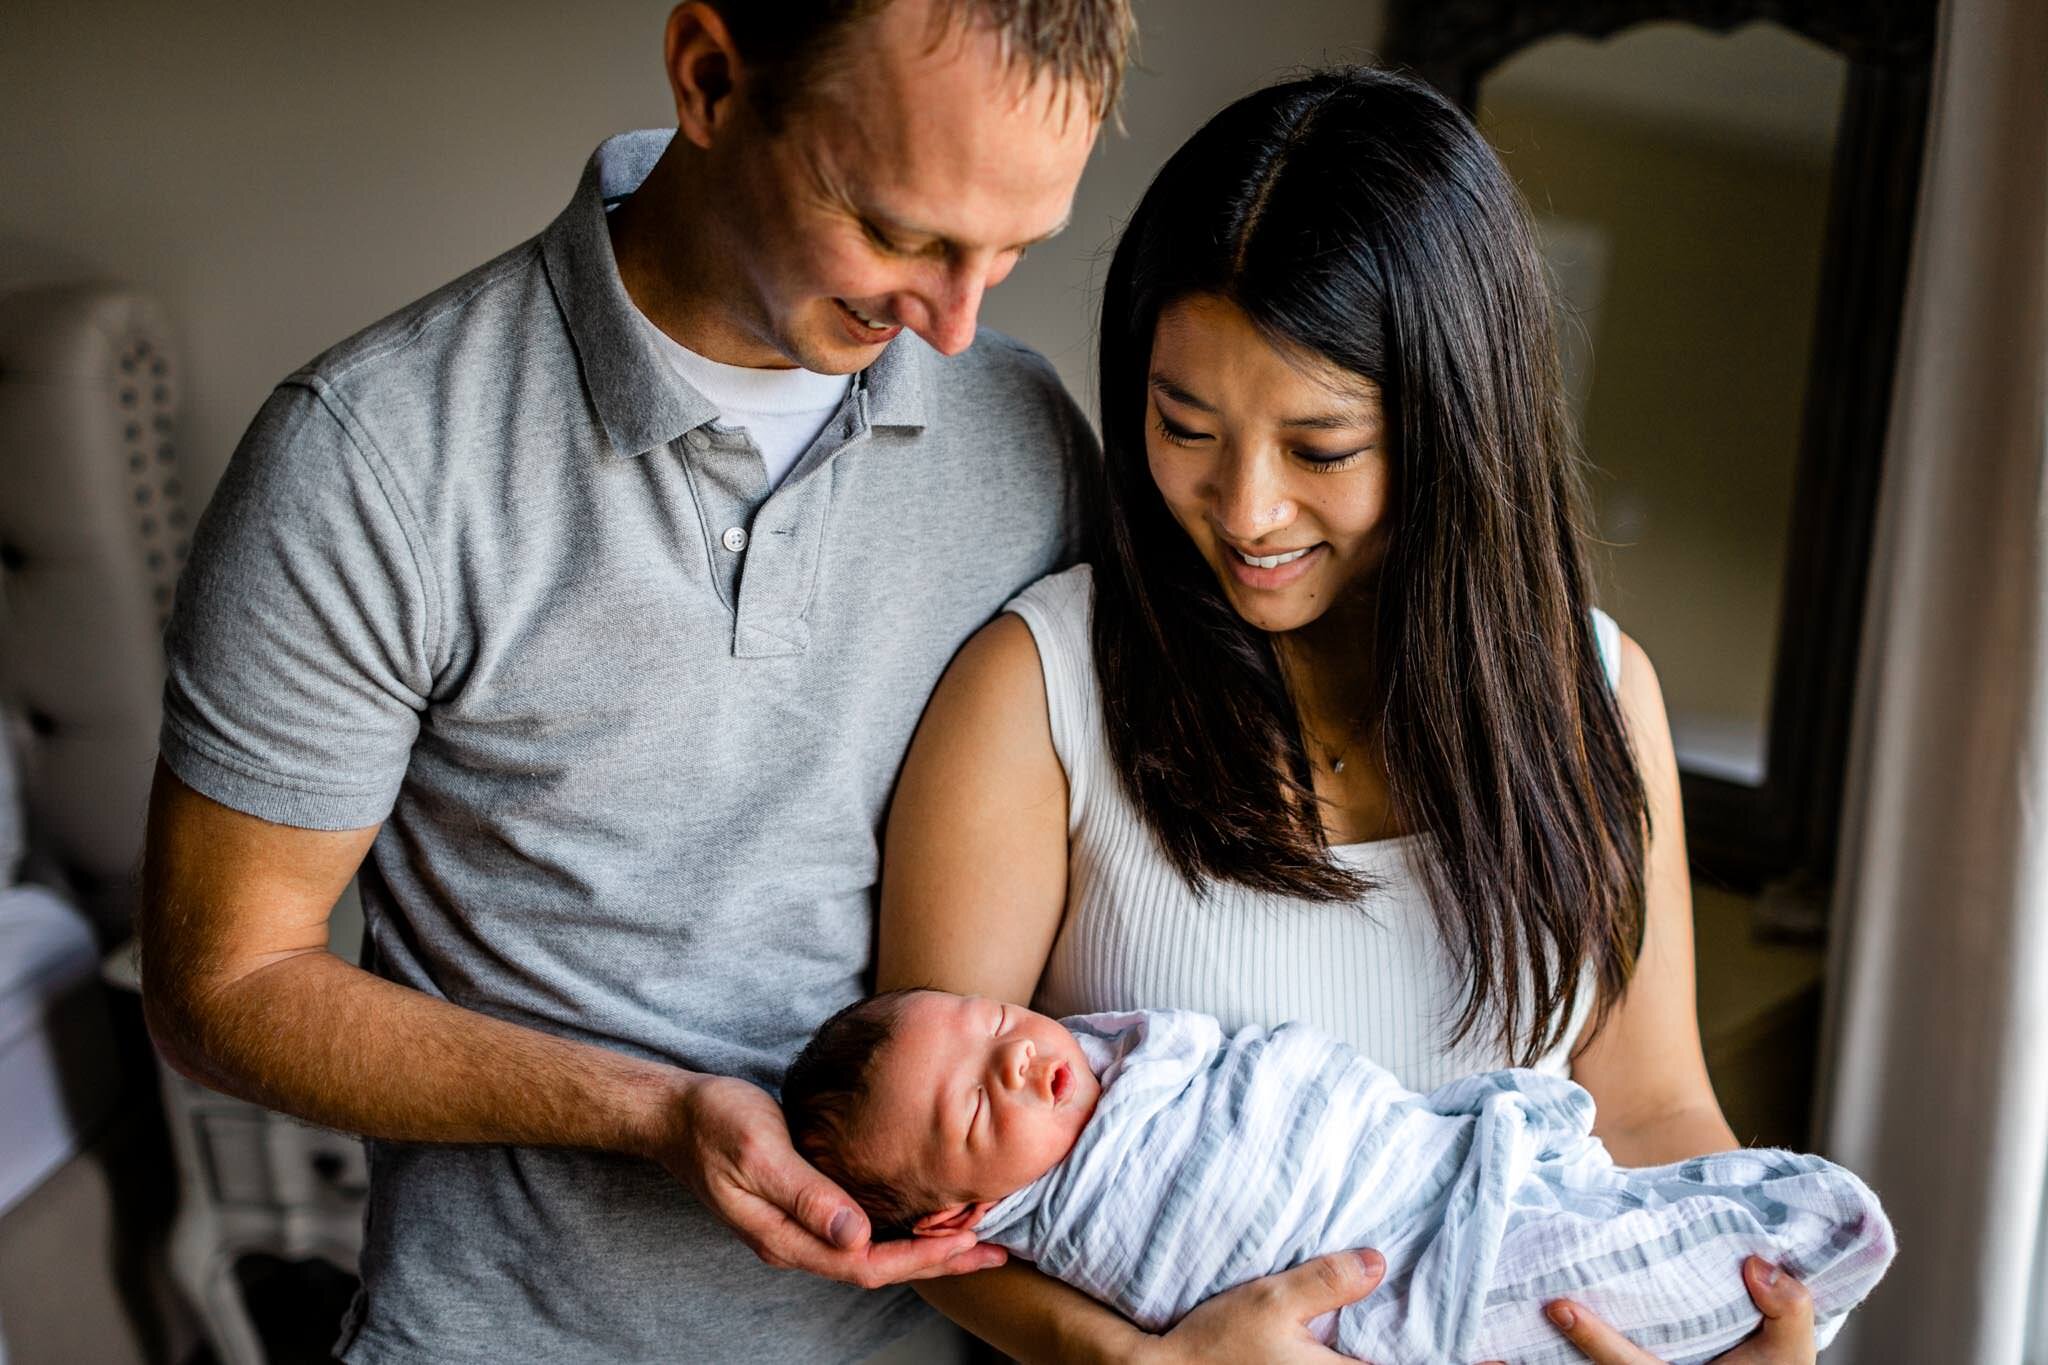 Father and mother holding baby in bedroom | Durham Newborn Photographer | By G. Lin Photography | Lifestyle newborn photography at home